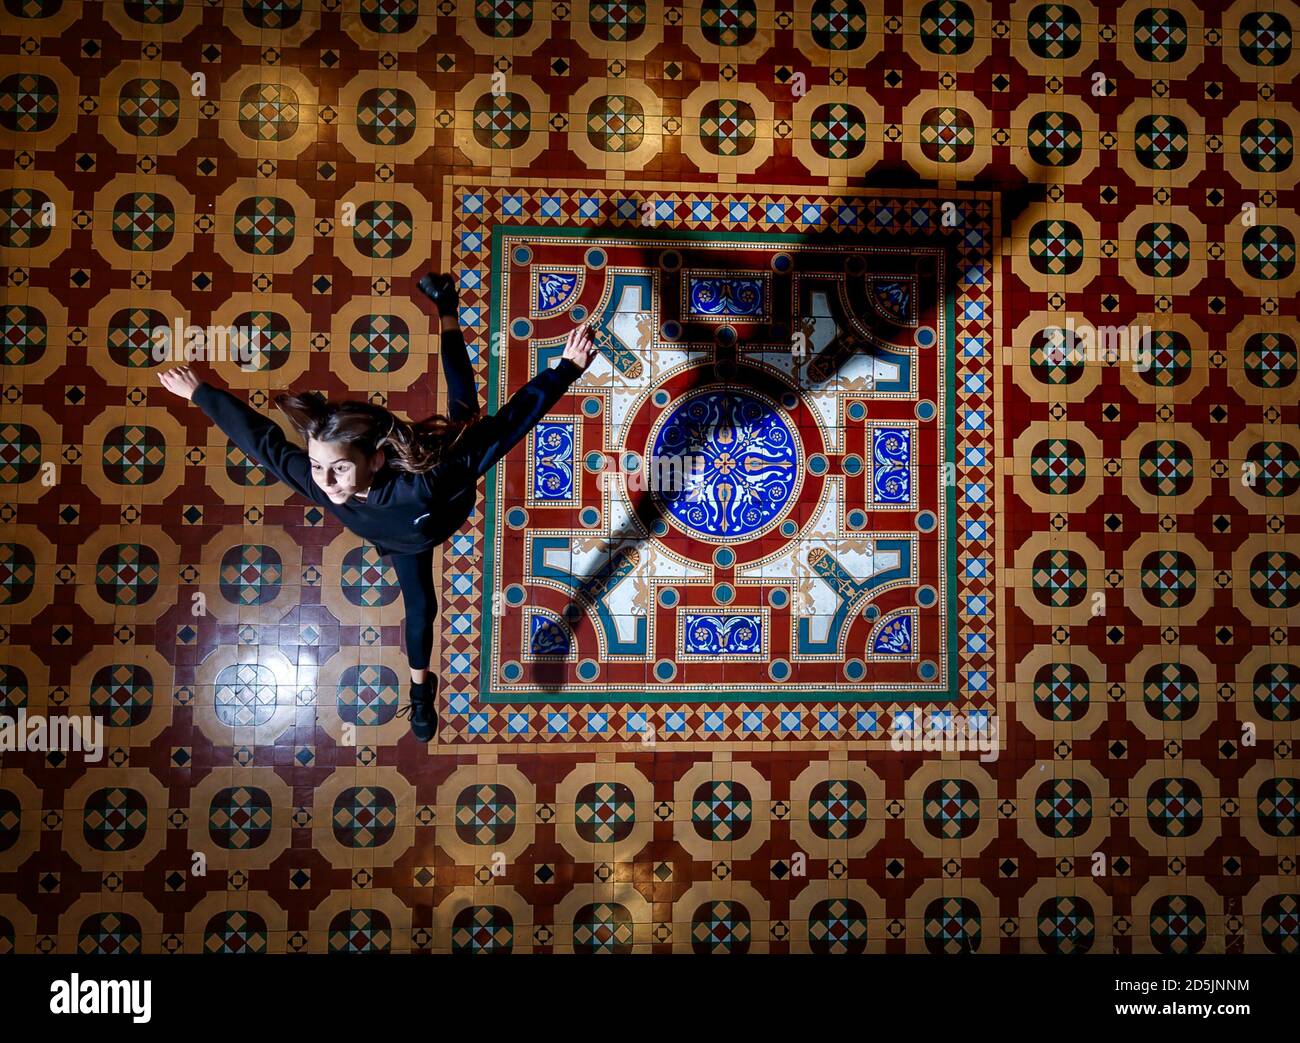 Isla McGee plays on a historic George and Arthur Maw tiled floor created in 1867, one of only two surviving examples of this assemblage of tiles, during a photocall at England's oldest living convent Bar Convent. Visitors to the convent are being invited to follow in the footsteps of residents from the last 150 years and enjoy the historic space decorated with rare 19th century floor tiles. Stock Photo